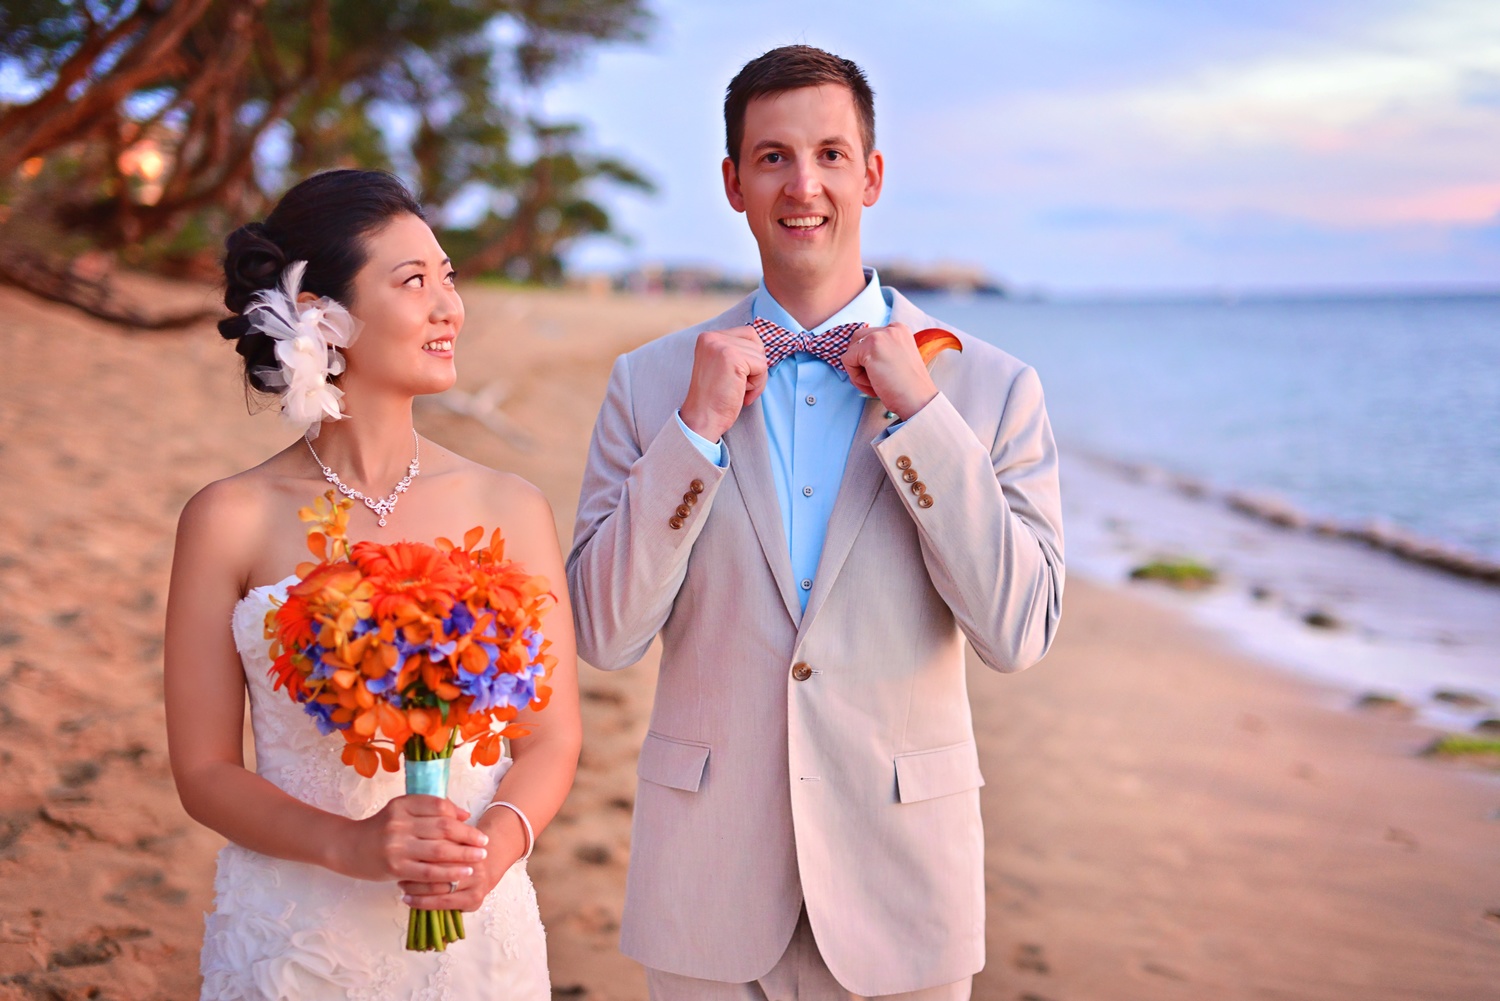 Wedding Planning Services in Maui